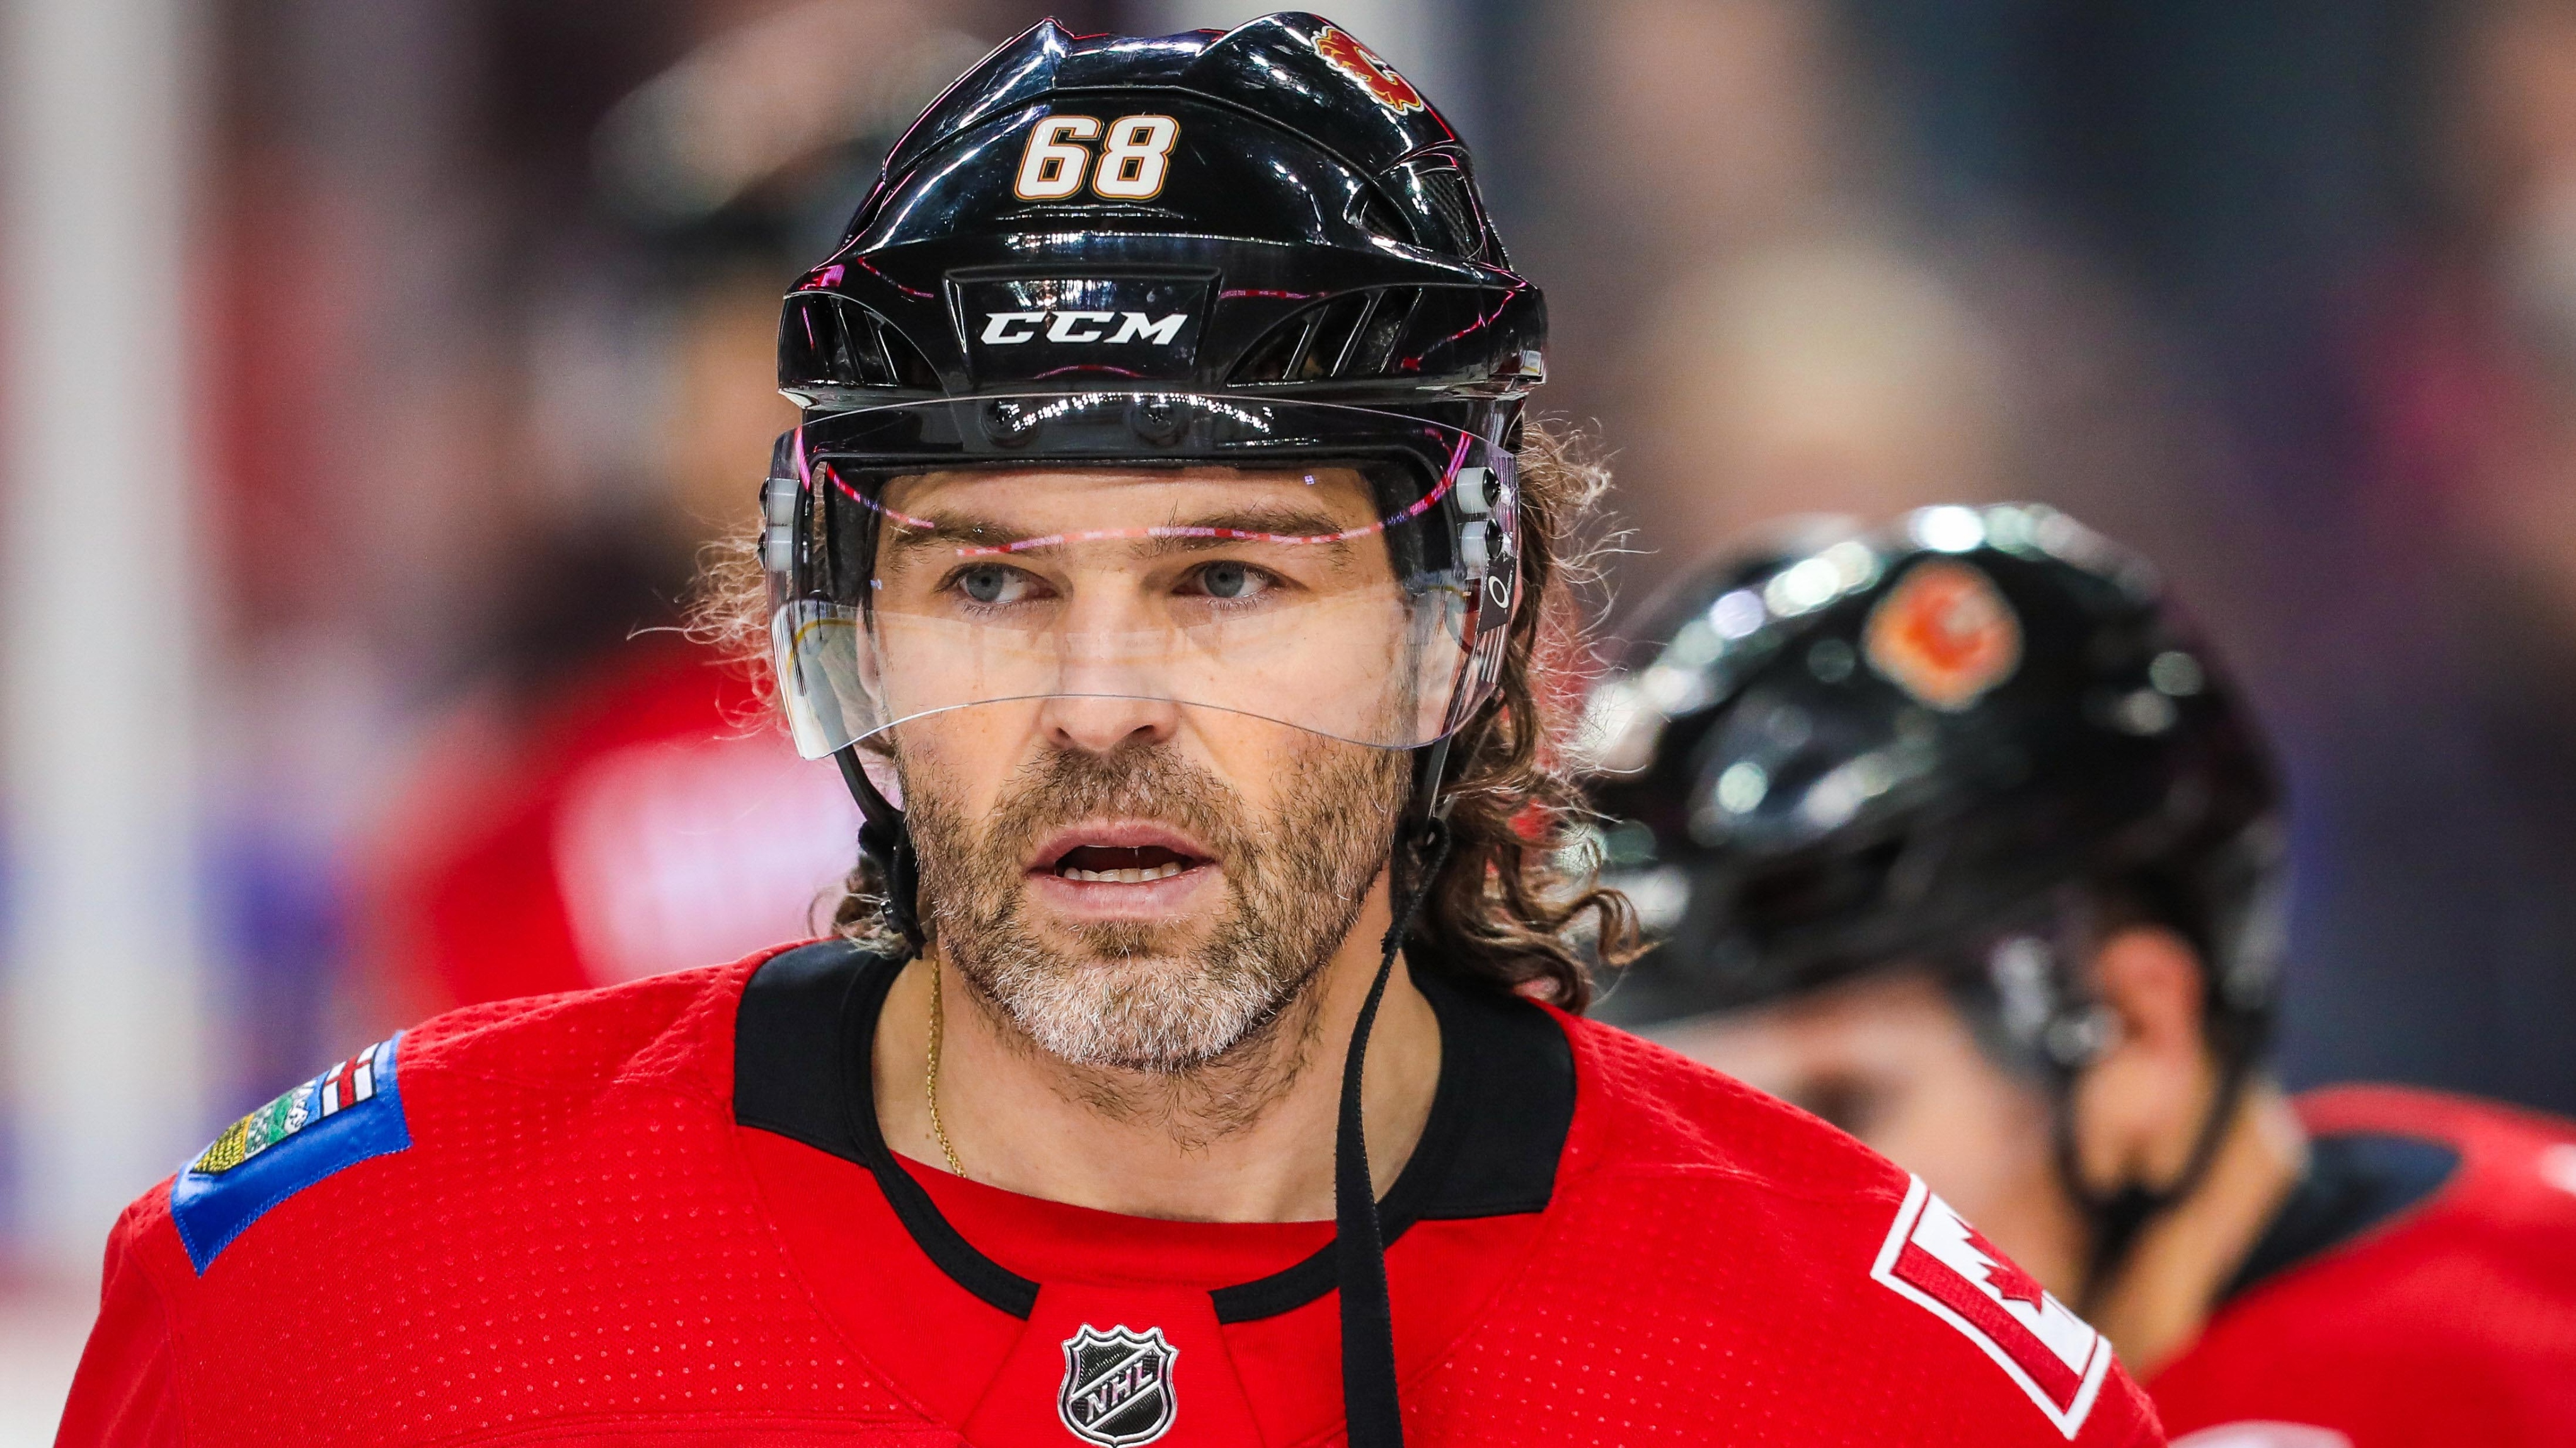 Jaromir Jagr, who is almost 50 years old, is an absolute UNIT, should come  back to the NHL as an enforcer, This is the Loop